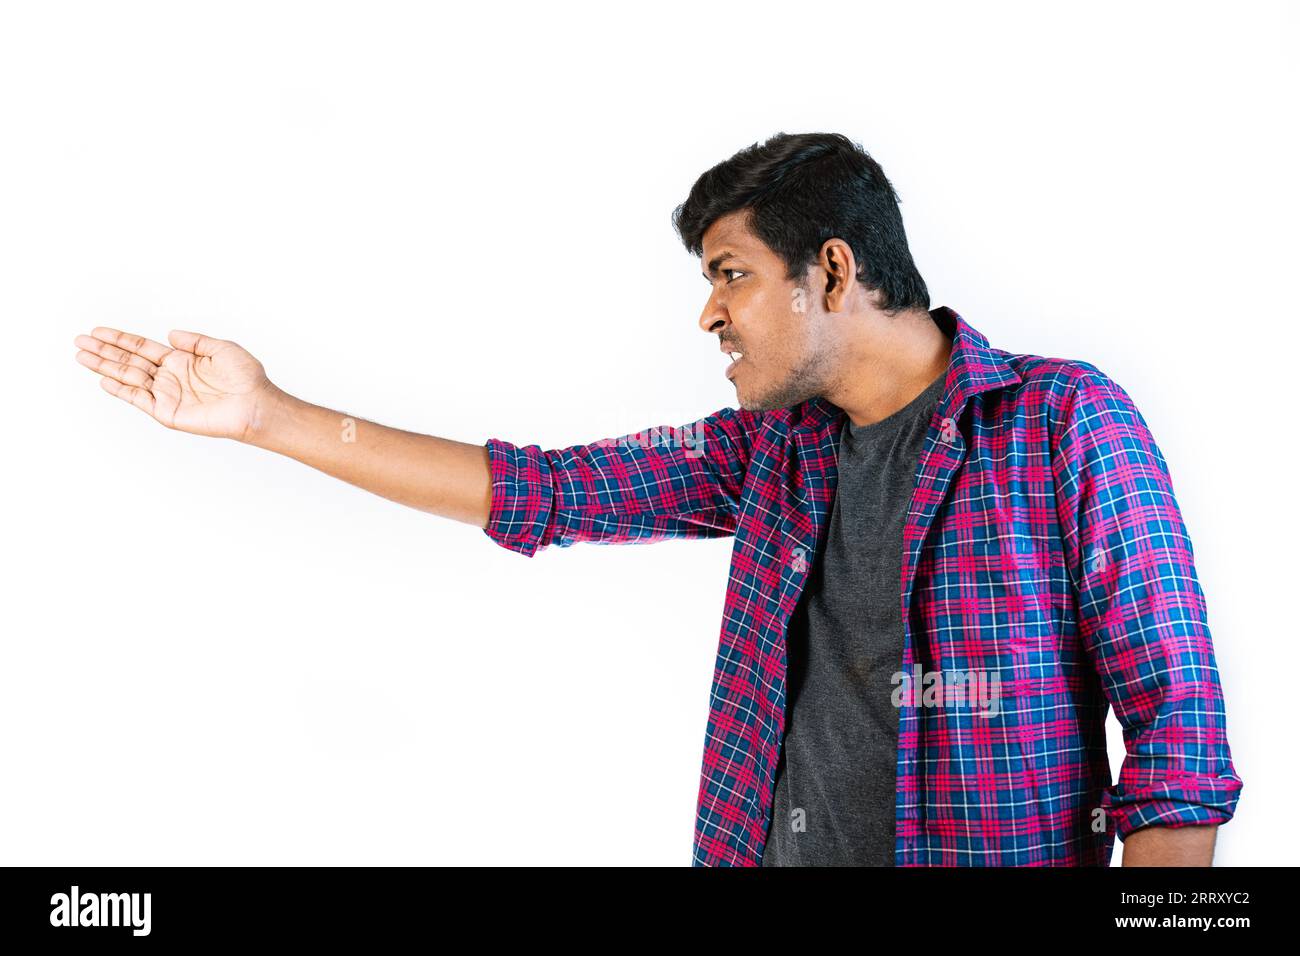 A young man is making an angry gesture against a plain background. He ...